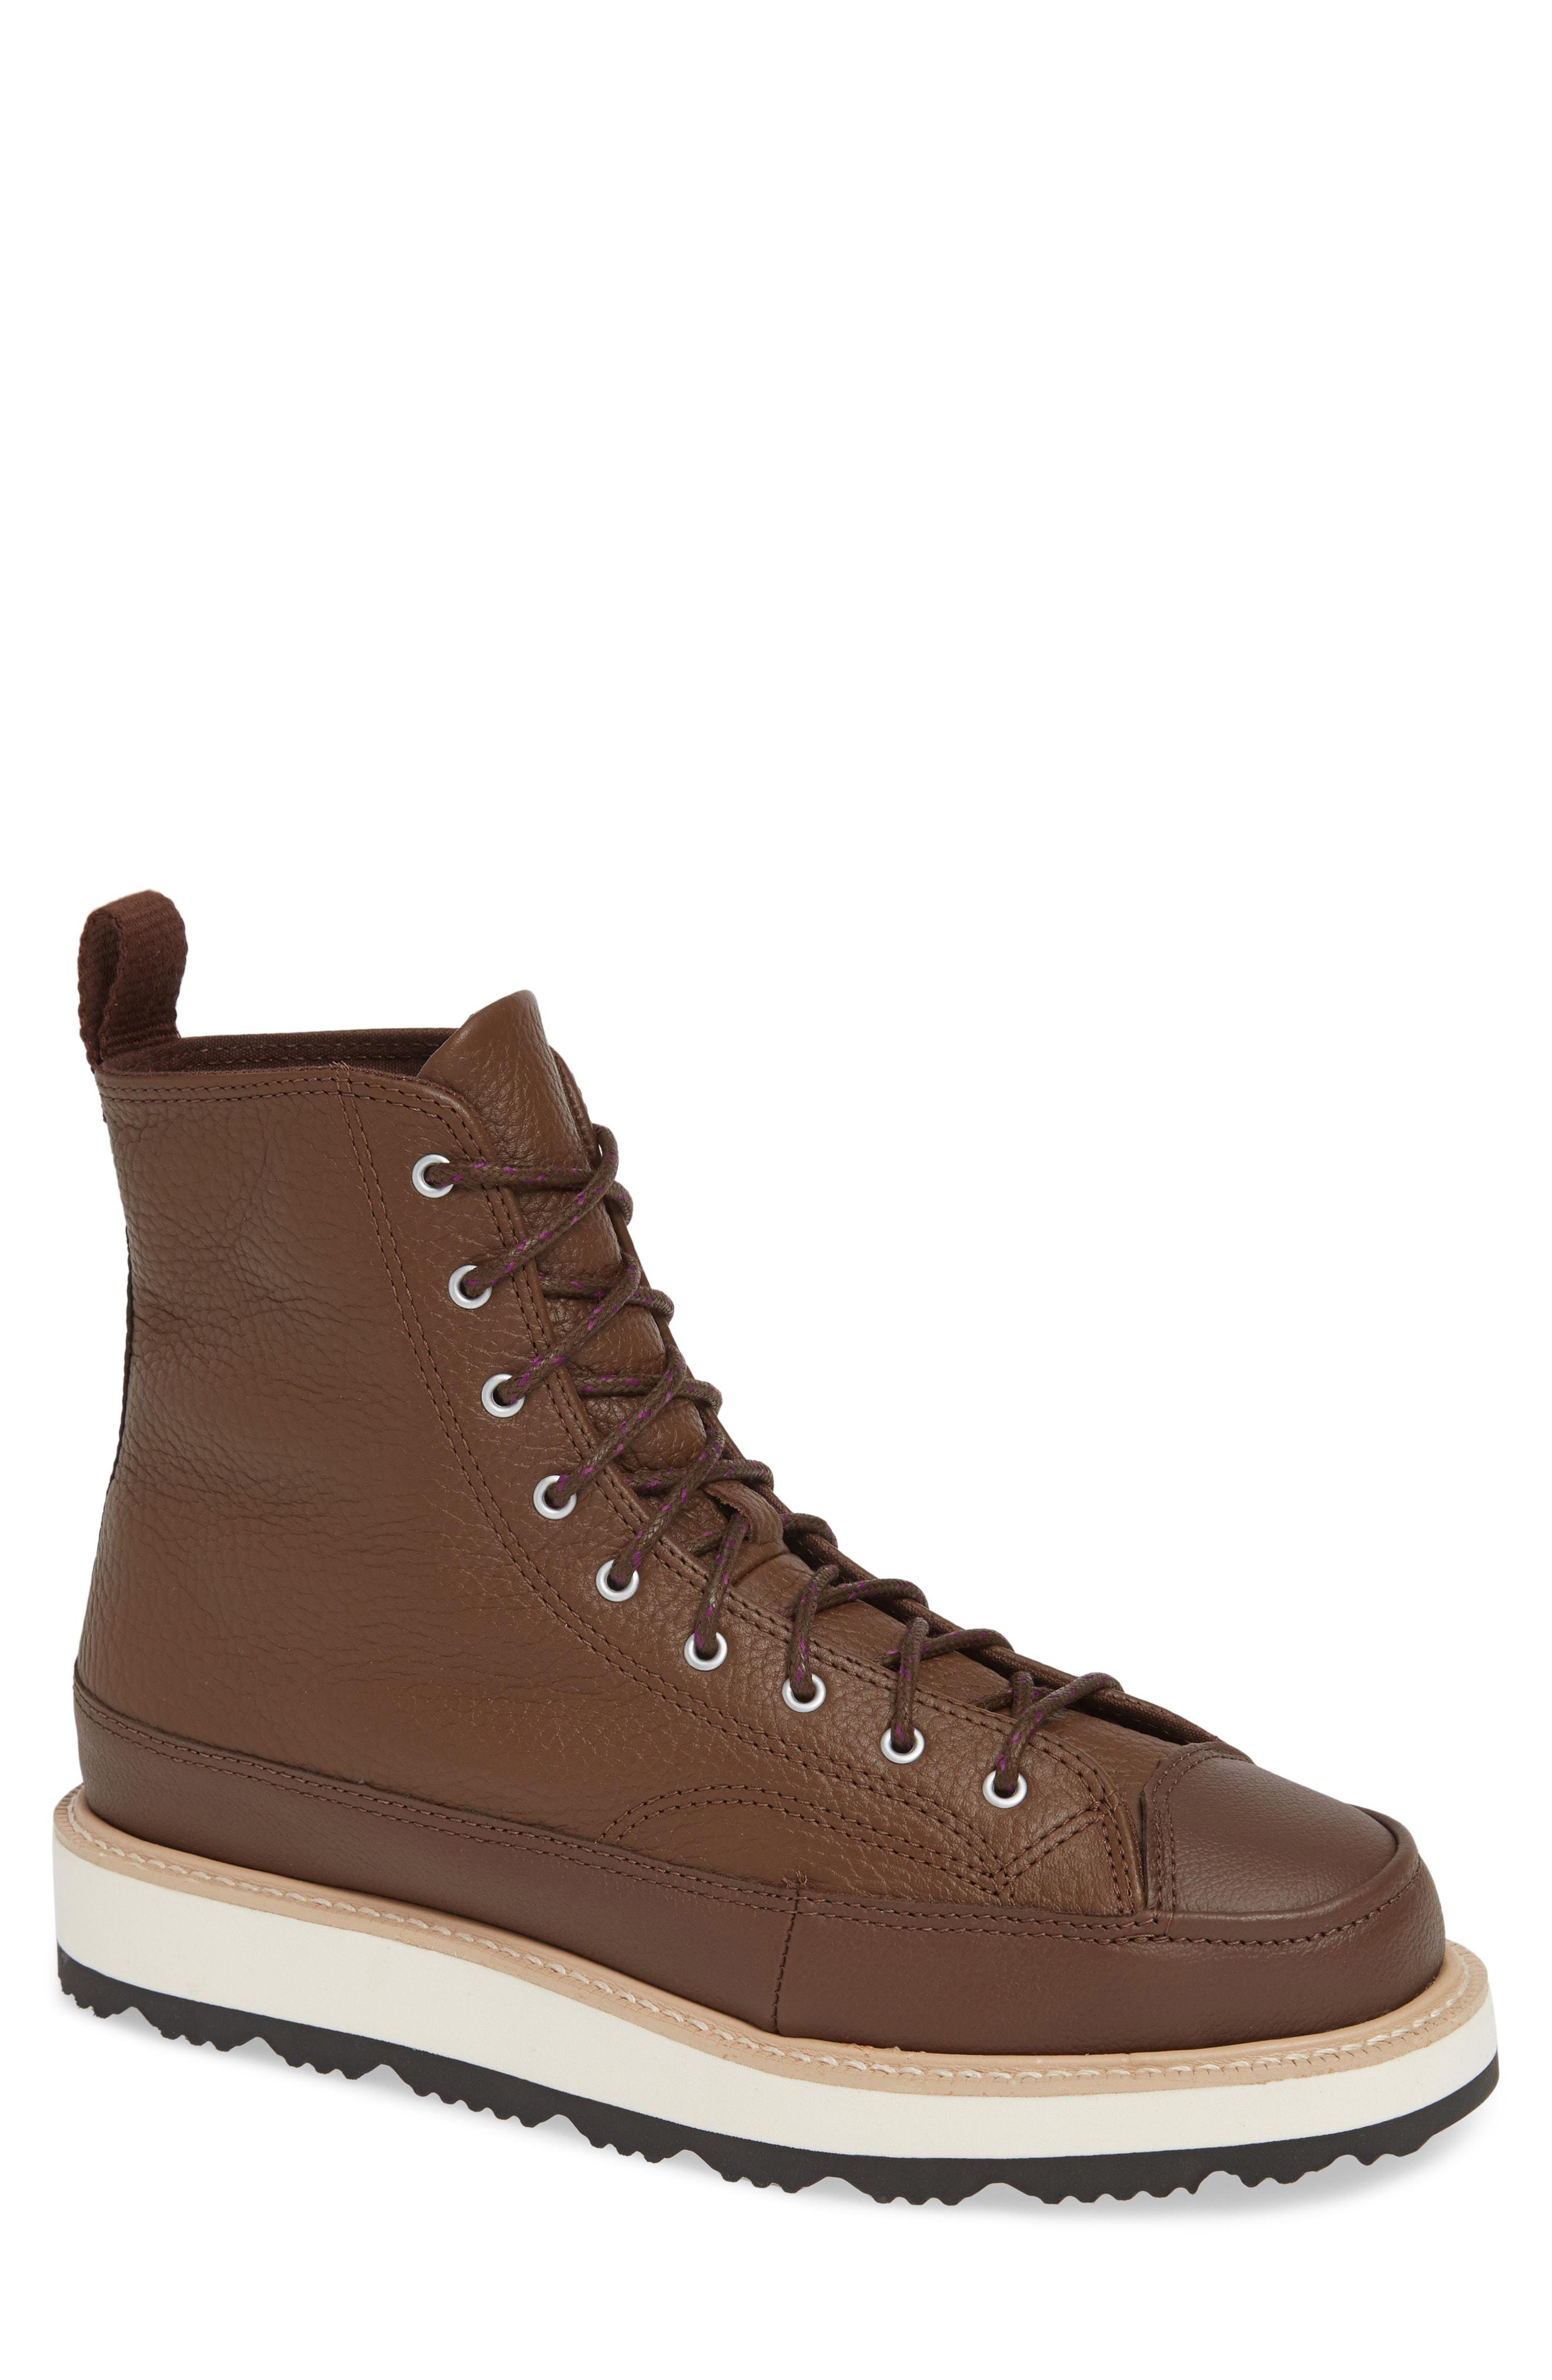 converse chuck taylor crafted boots